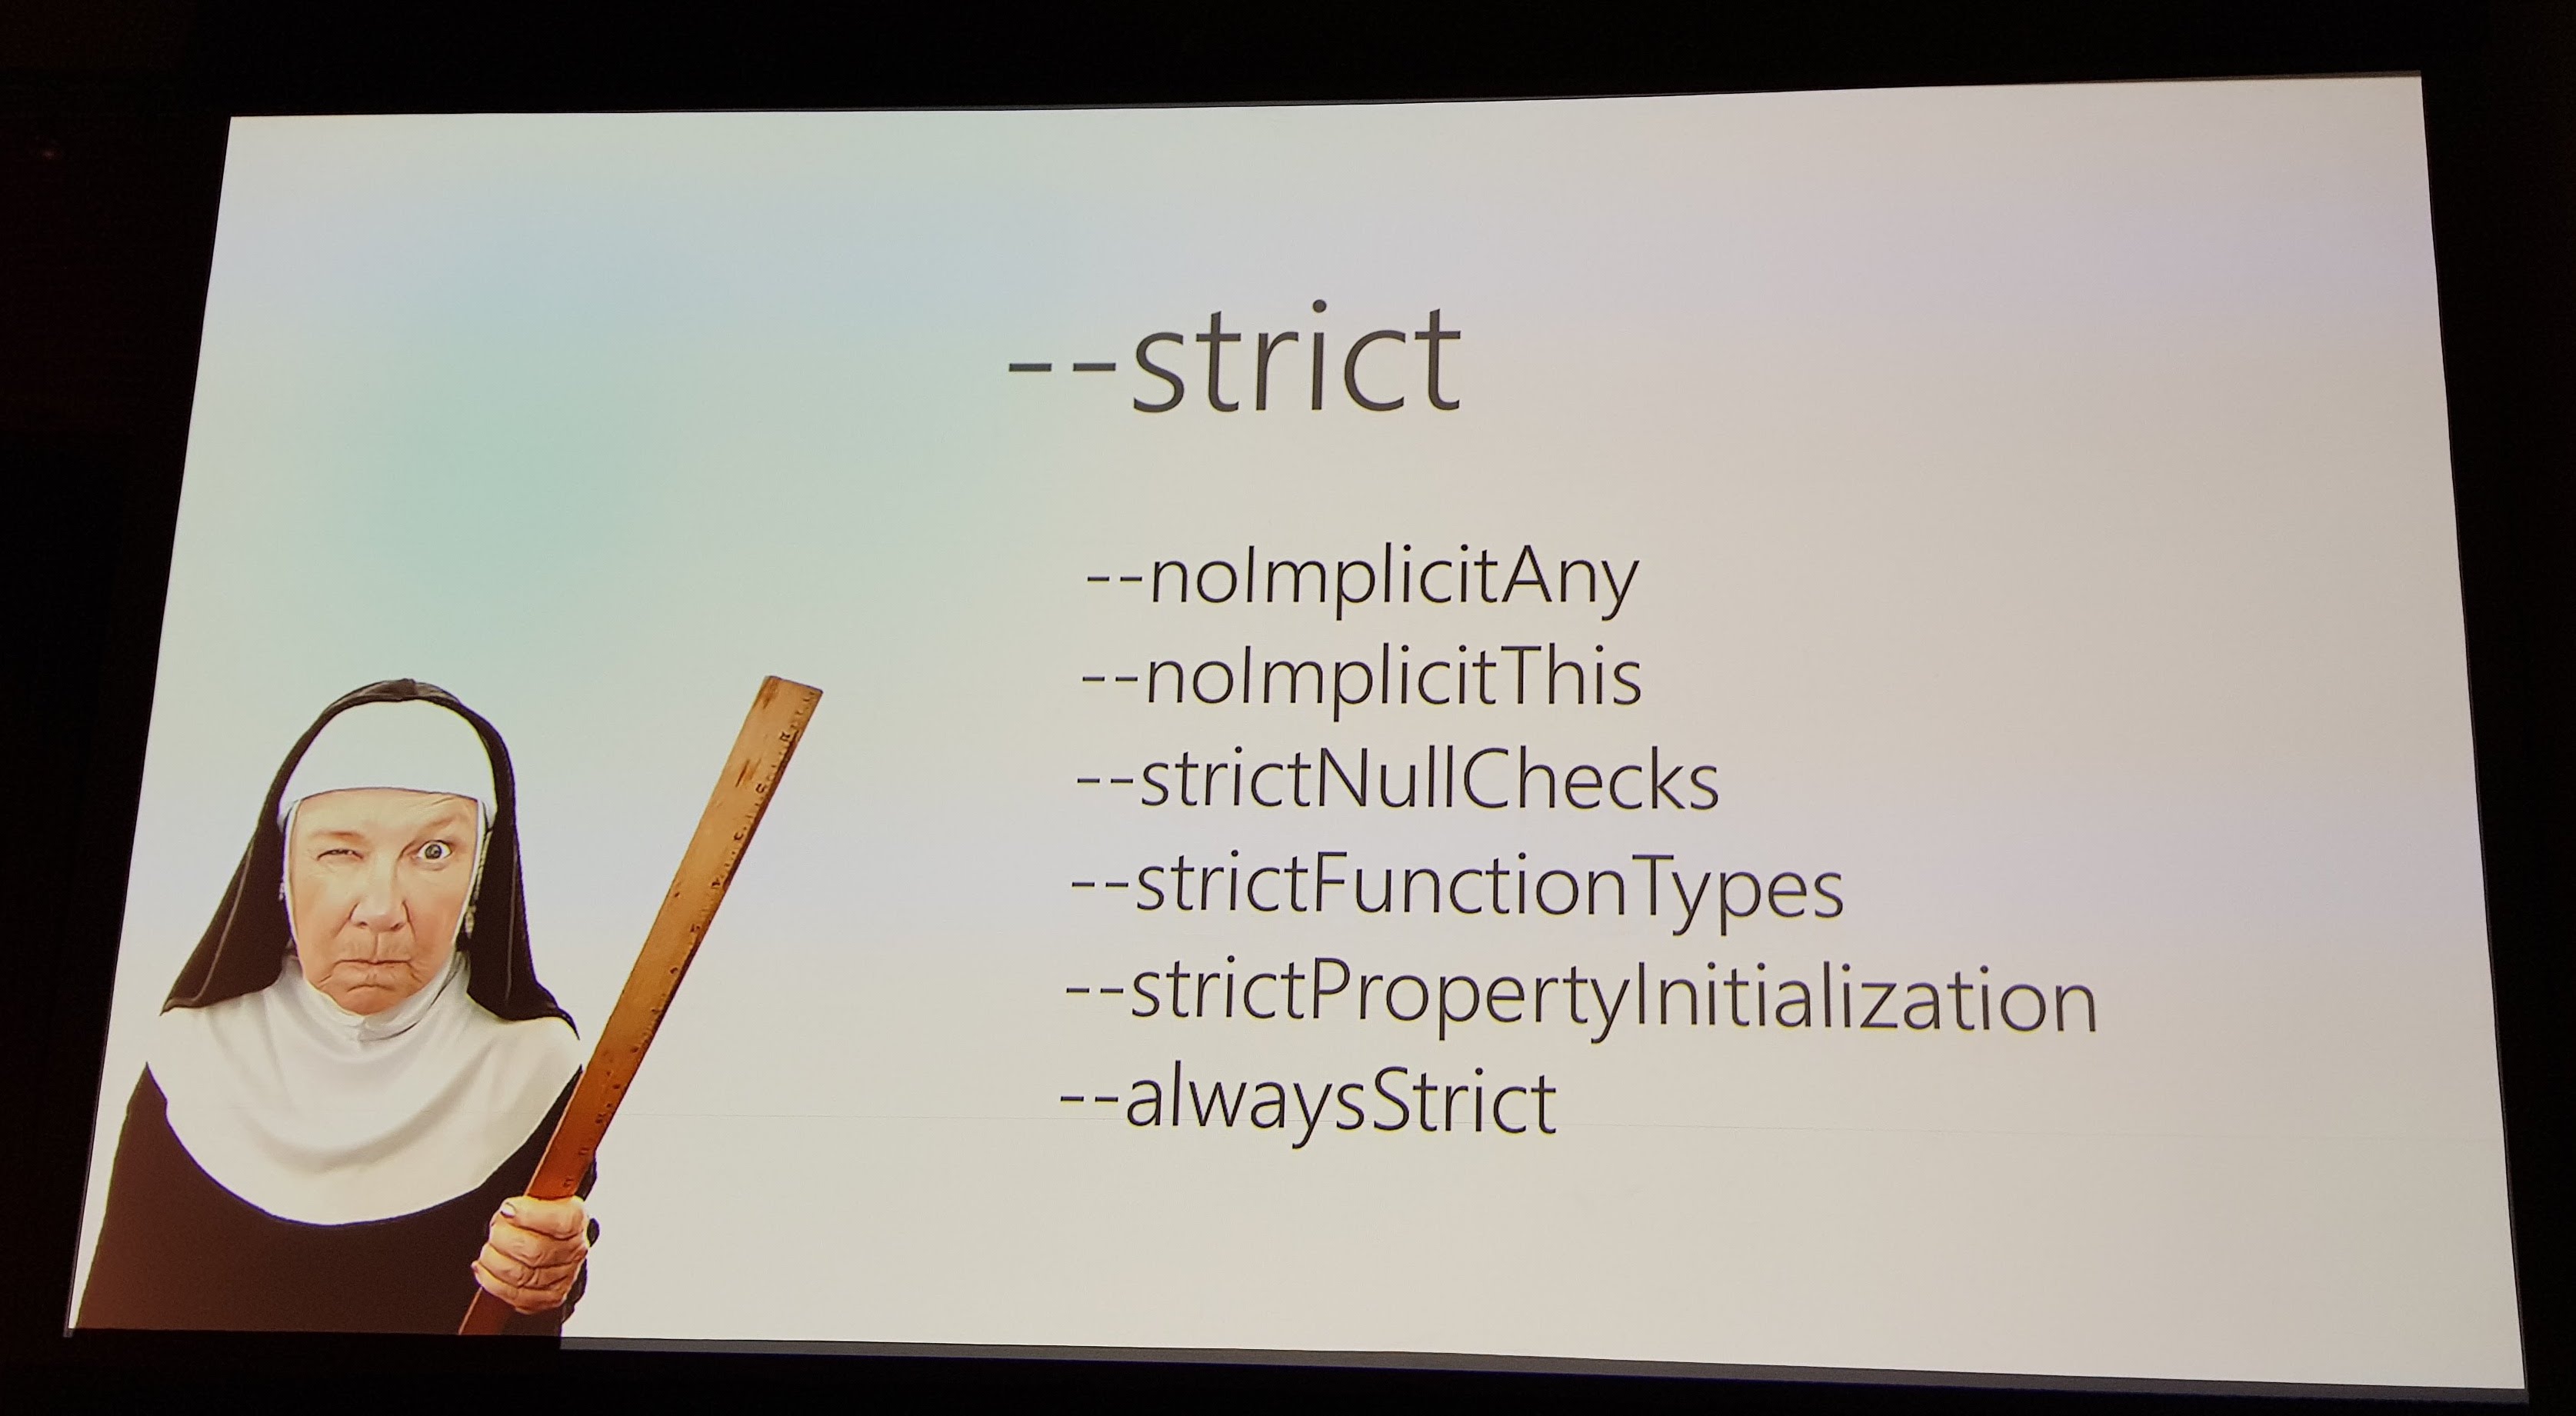 A slide showing a nun with a ruler and talking about strict mode in TypeScript